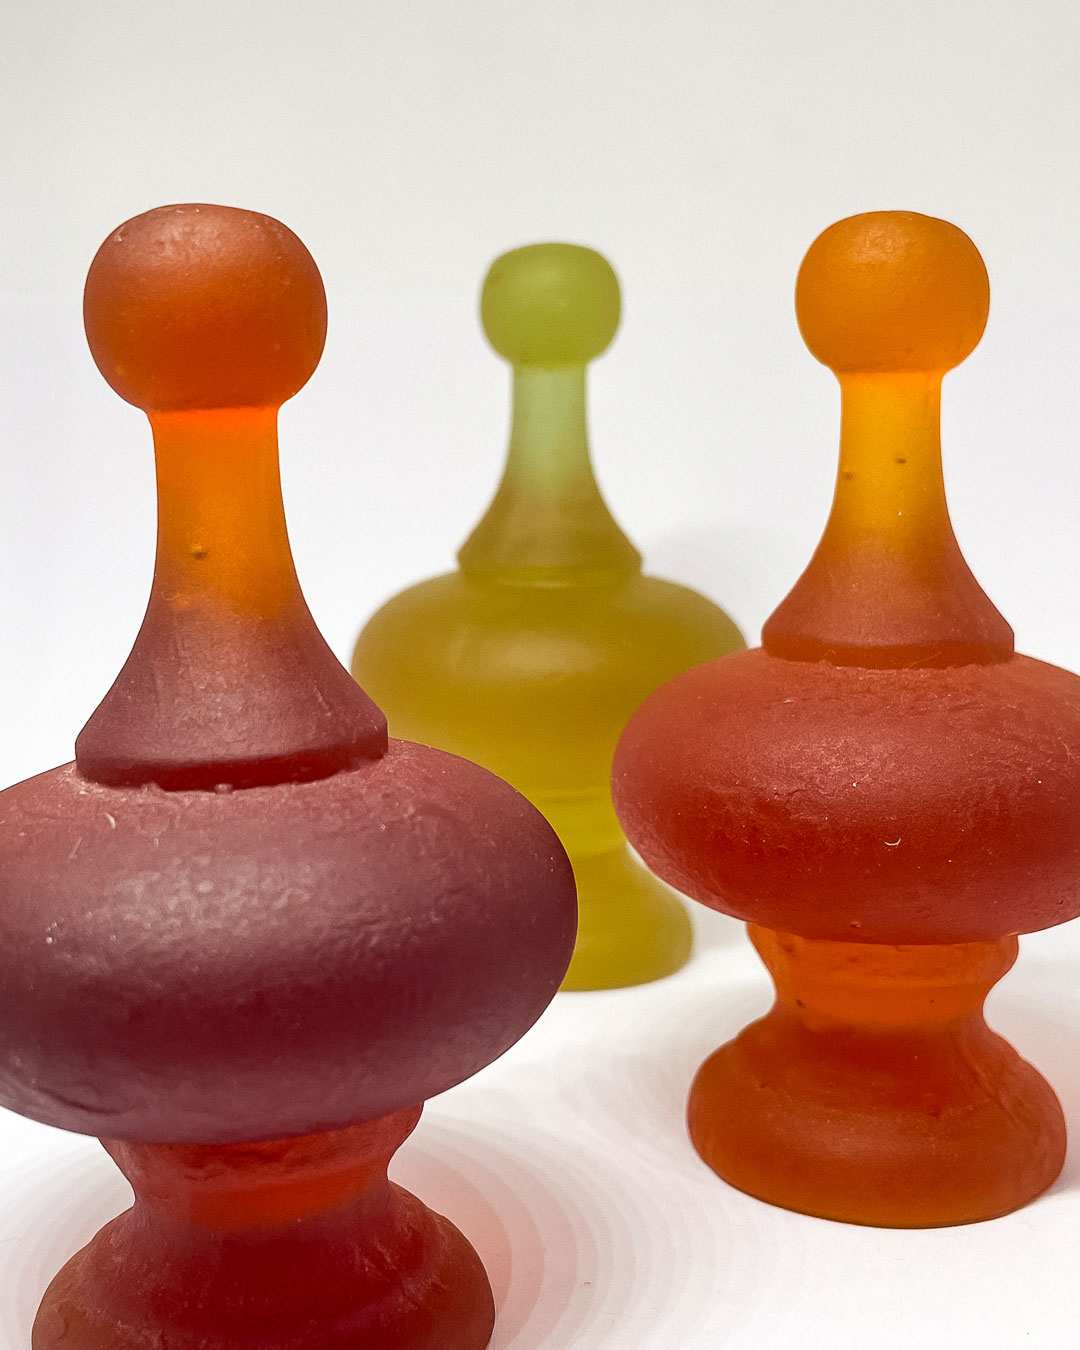 A closeup of a group of three cast glass finials in Dark Orange, Orange and Rhubarb. They form wonderful light-filled installations in groups.